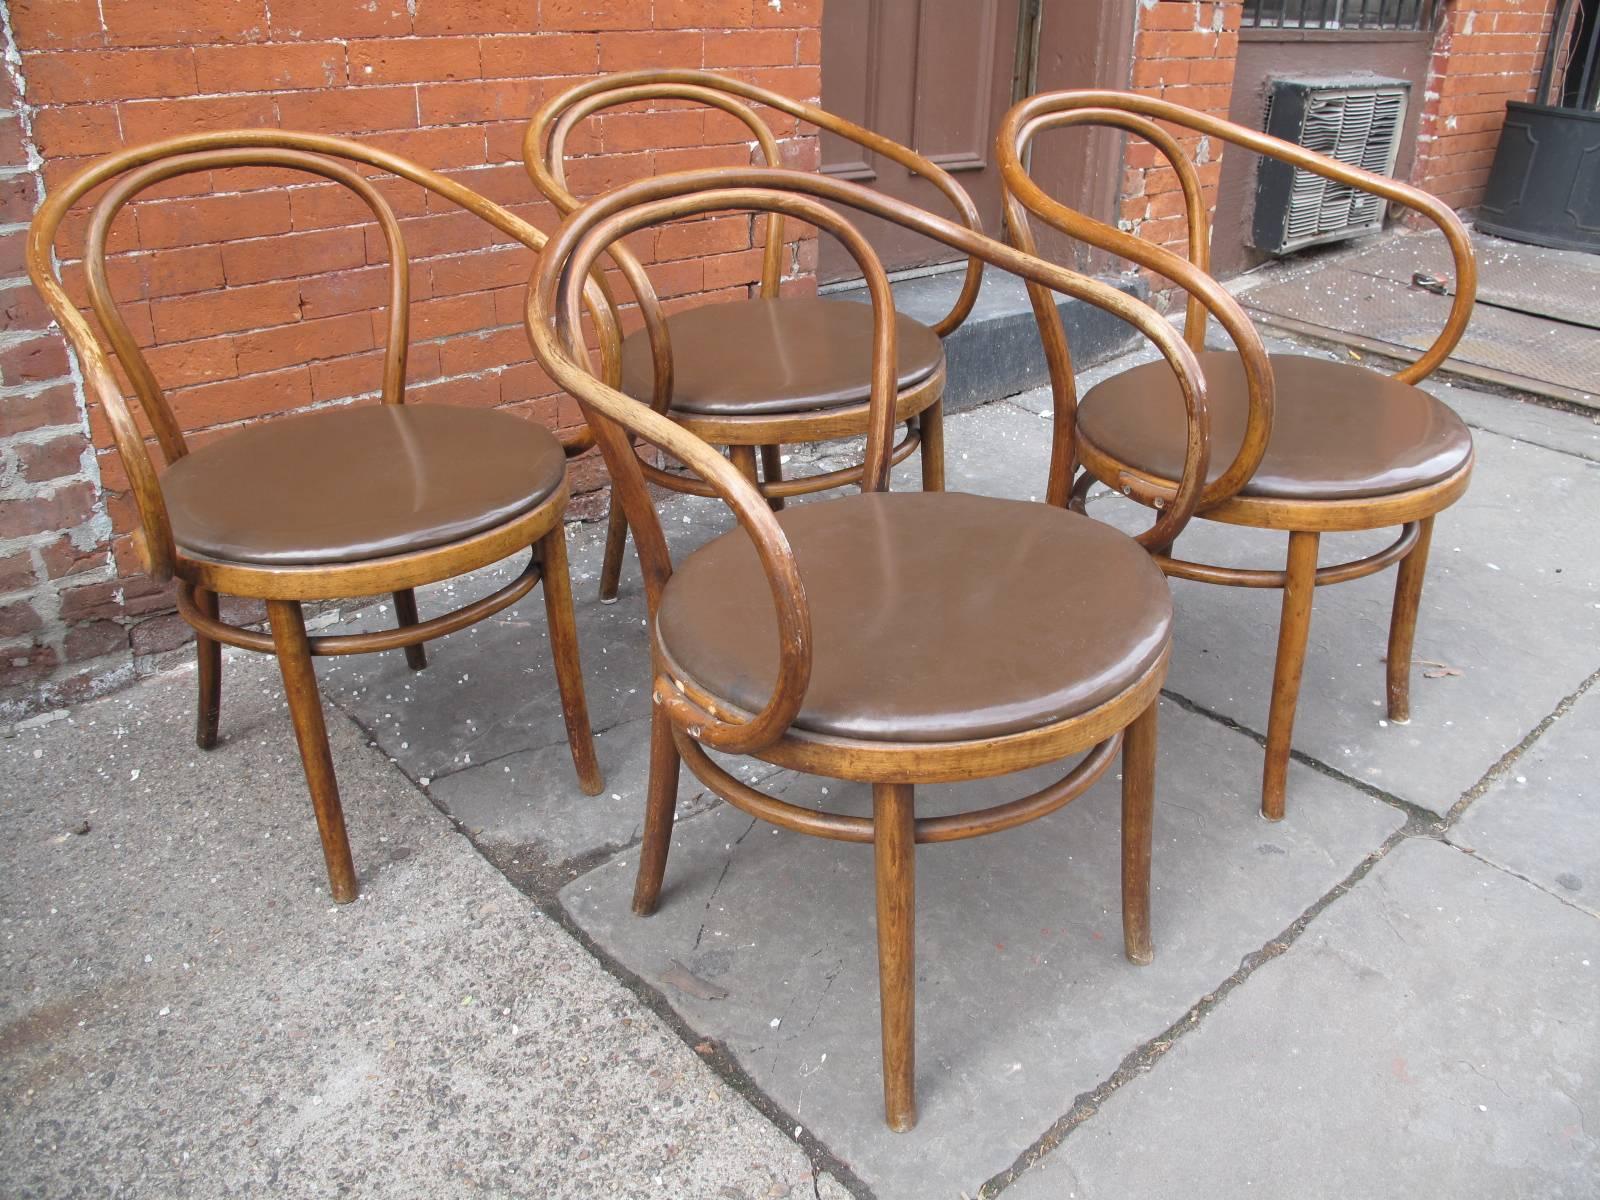 Four Thonet armchairs, no. 209. With replacement seats upholstered in brown faux leather.